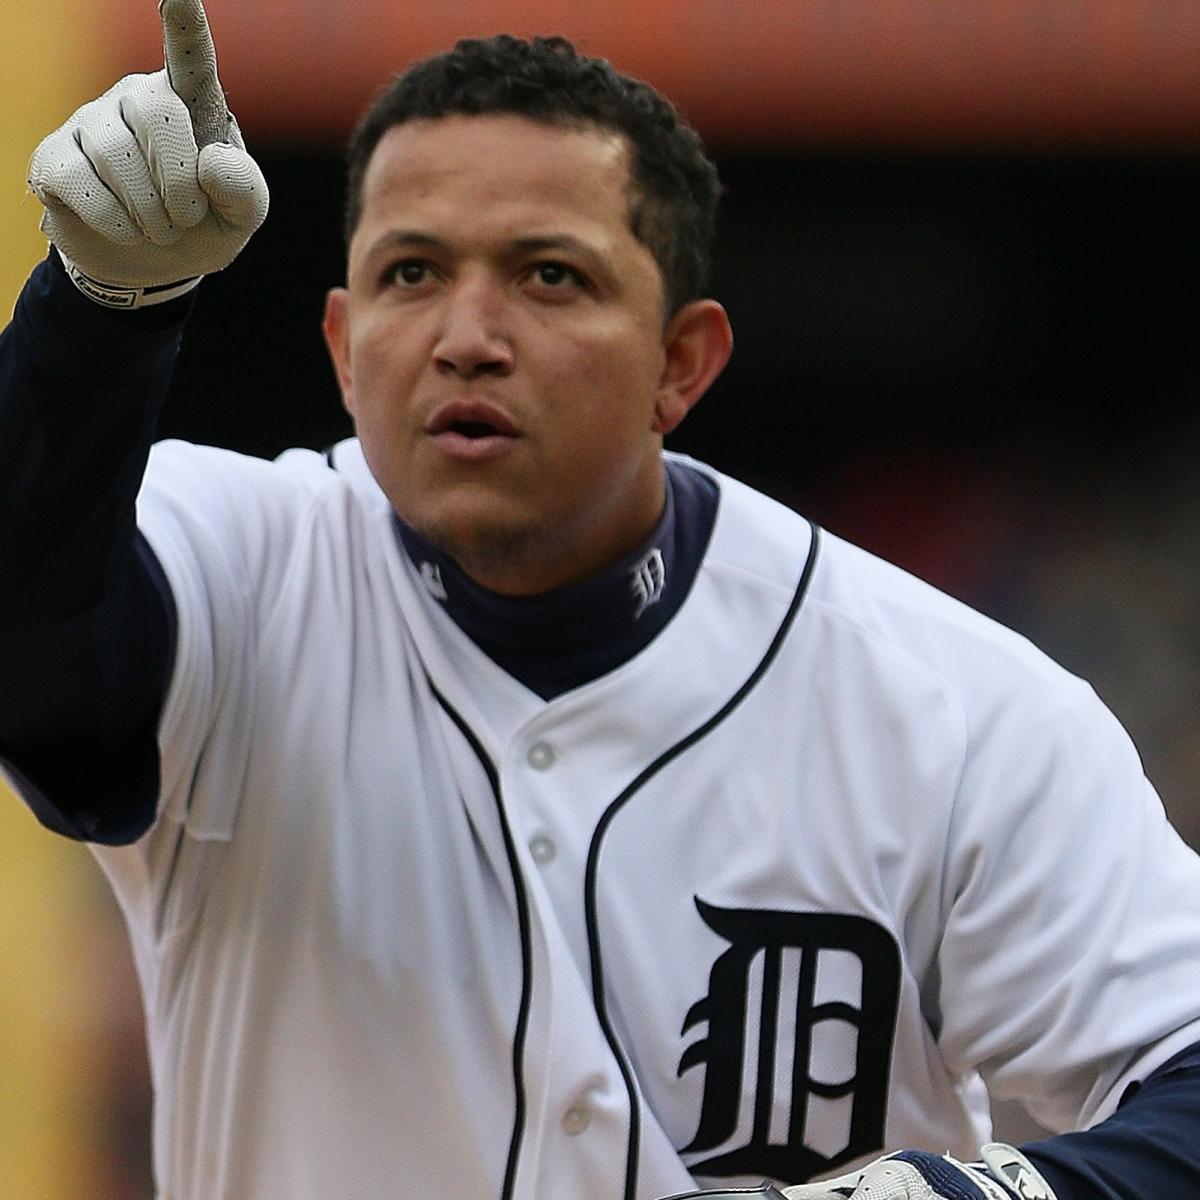 Miguel Cabrera Clinches The Triple Crown (10/3/12)  9 years ago today,  Miggy made history. Relive the day he clinched the first Triple Crown in 45  years en route to winning his